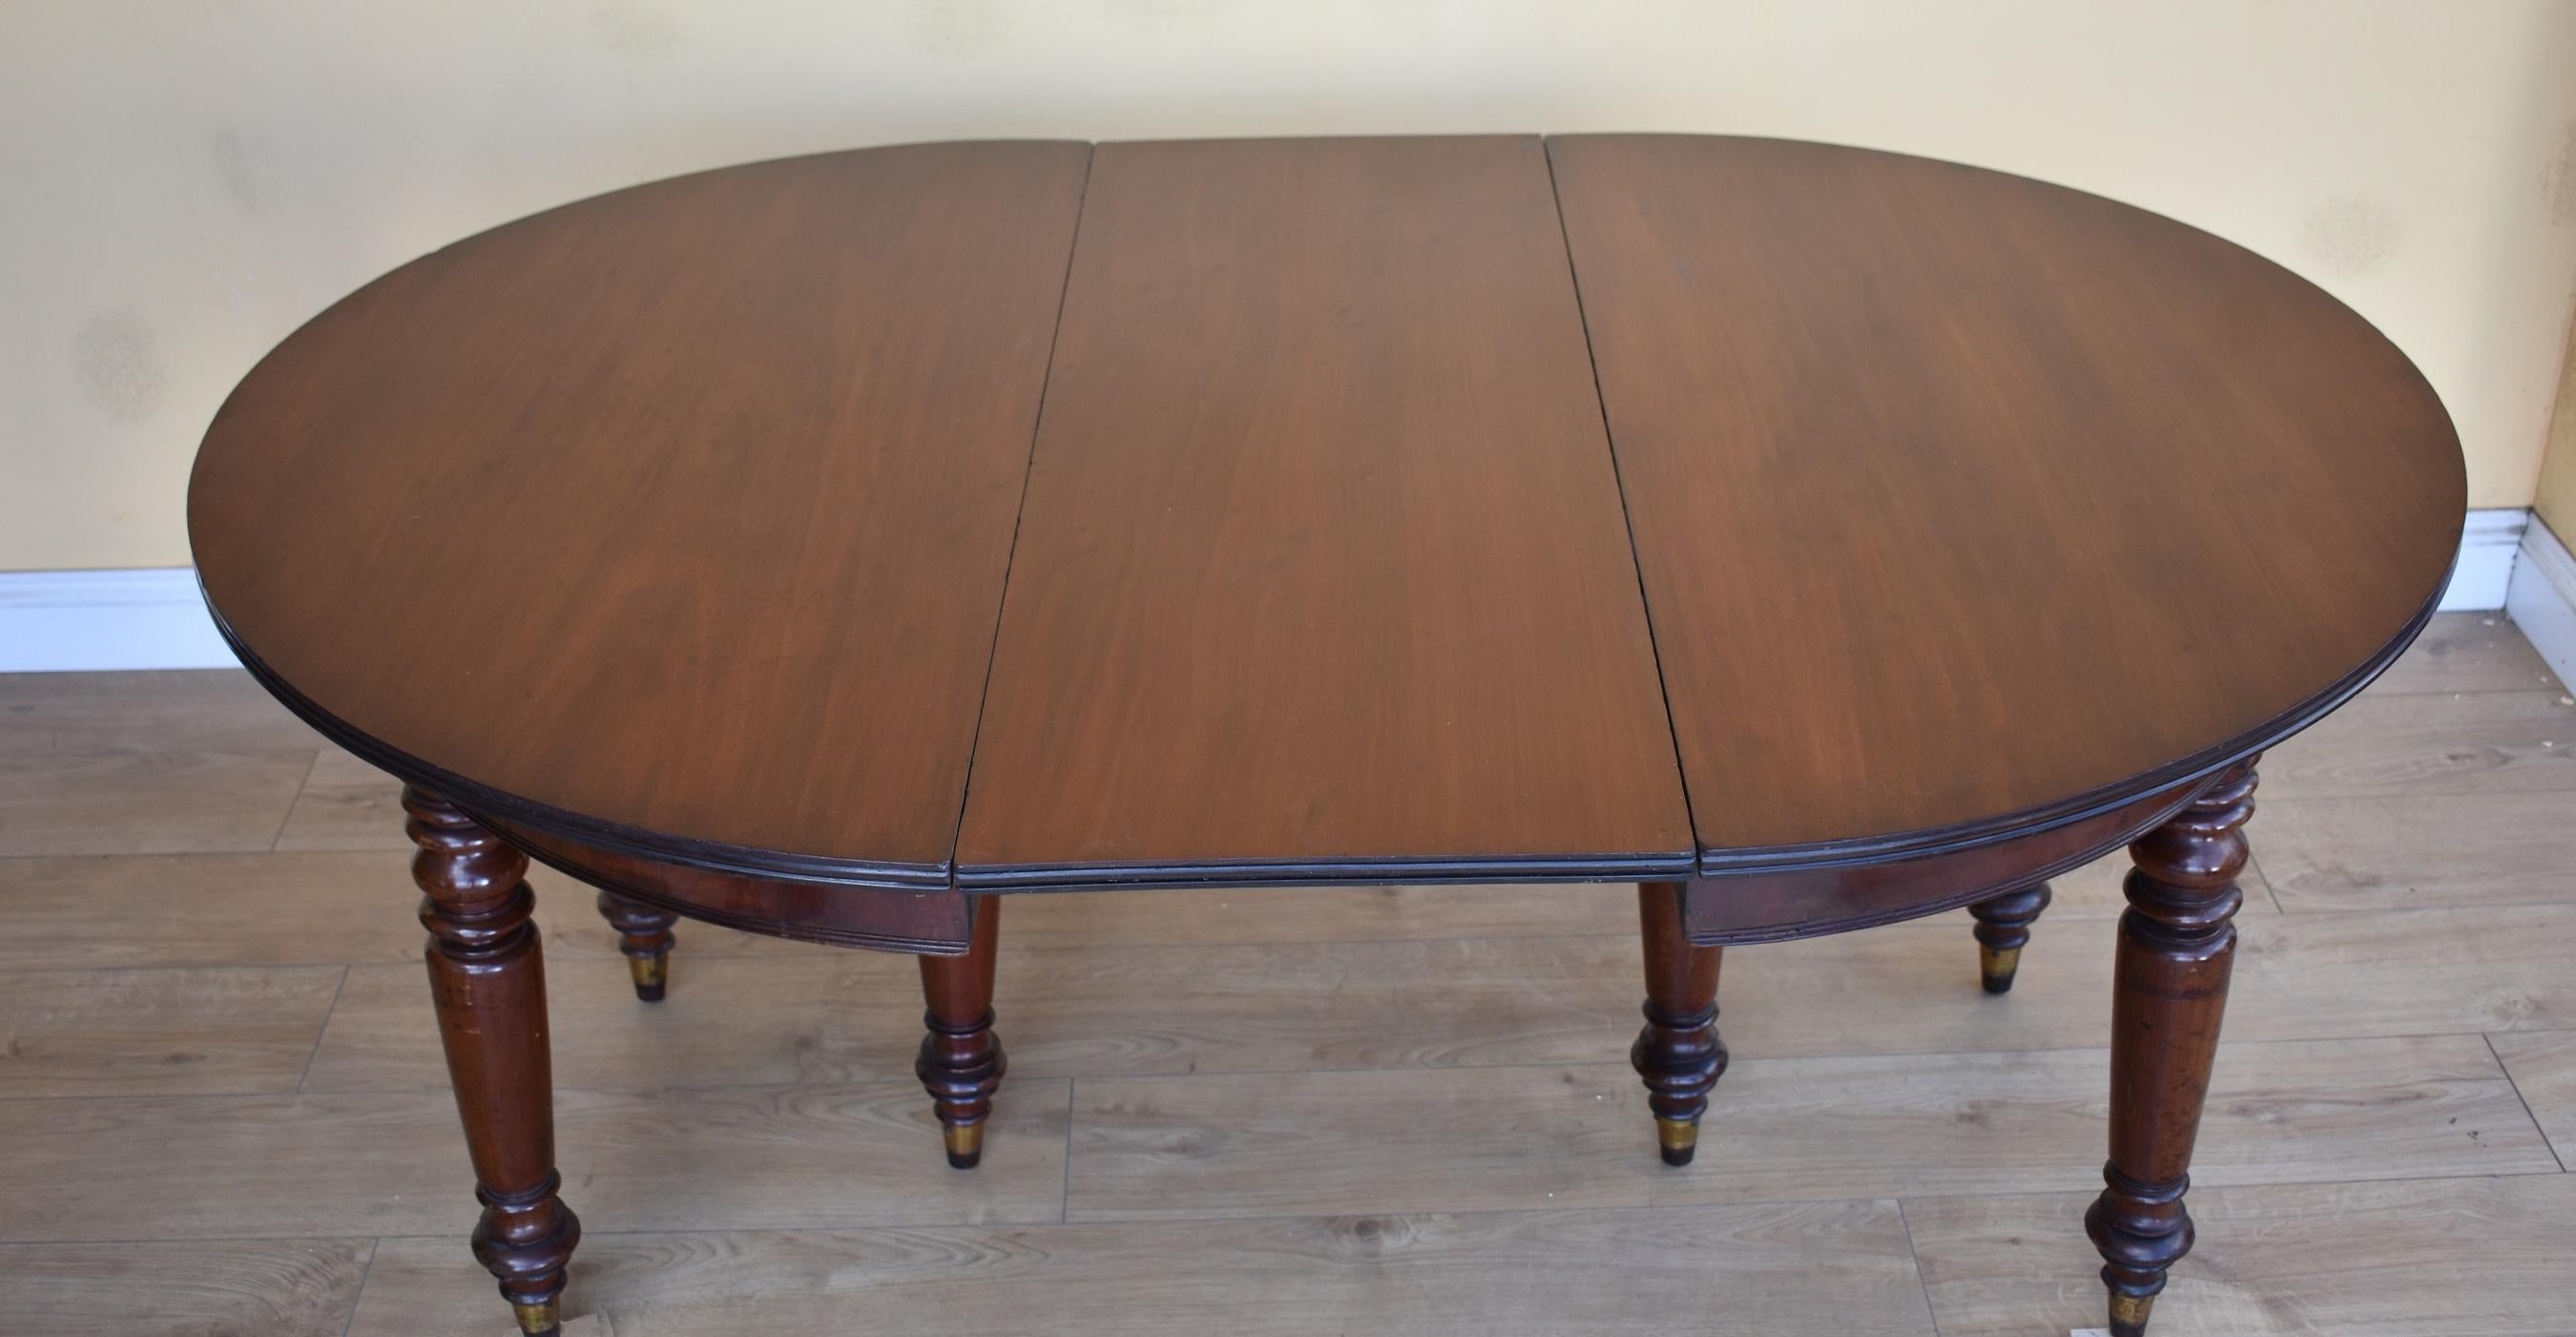 19th Century English William IV Mahogany Dining Table For Sale 3